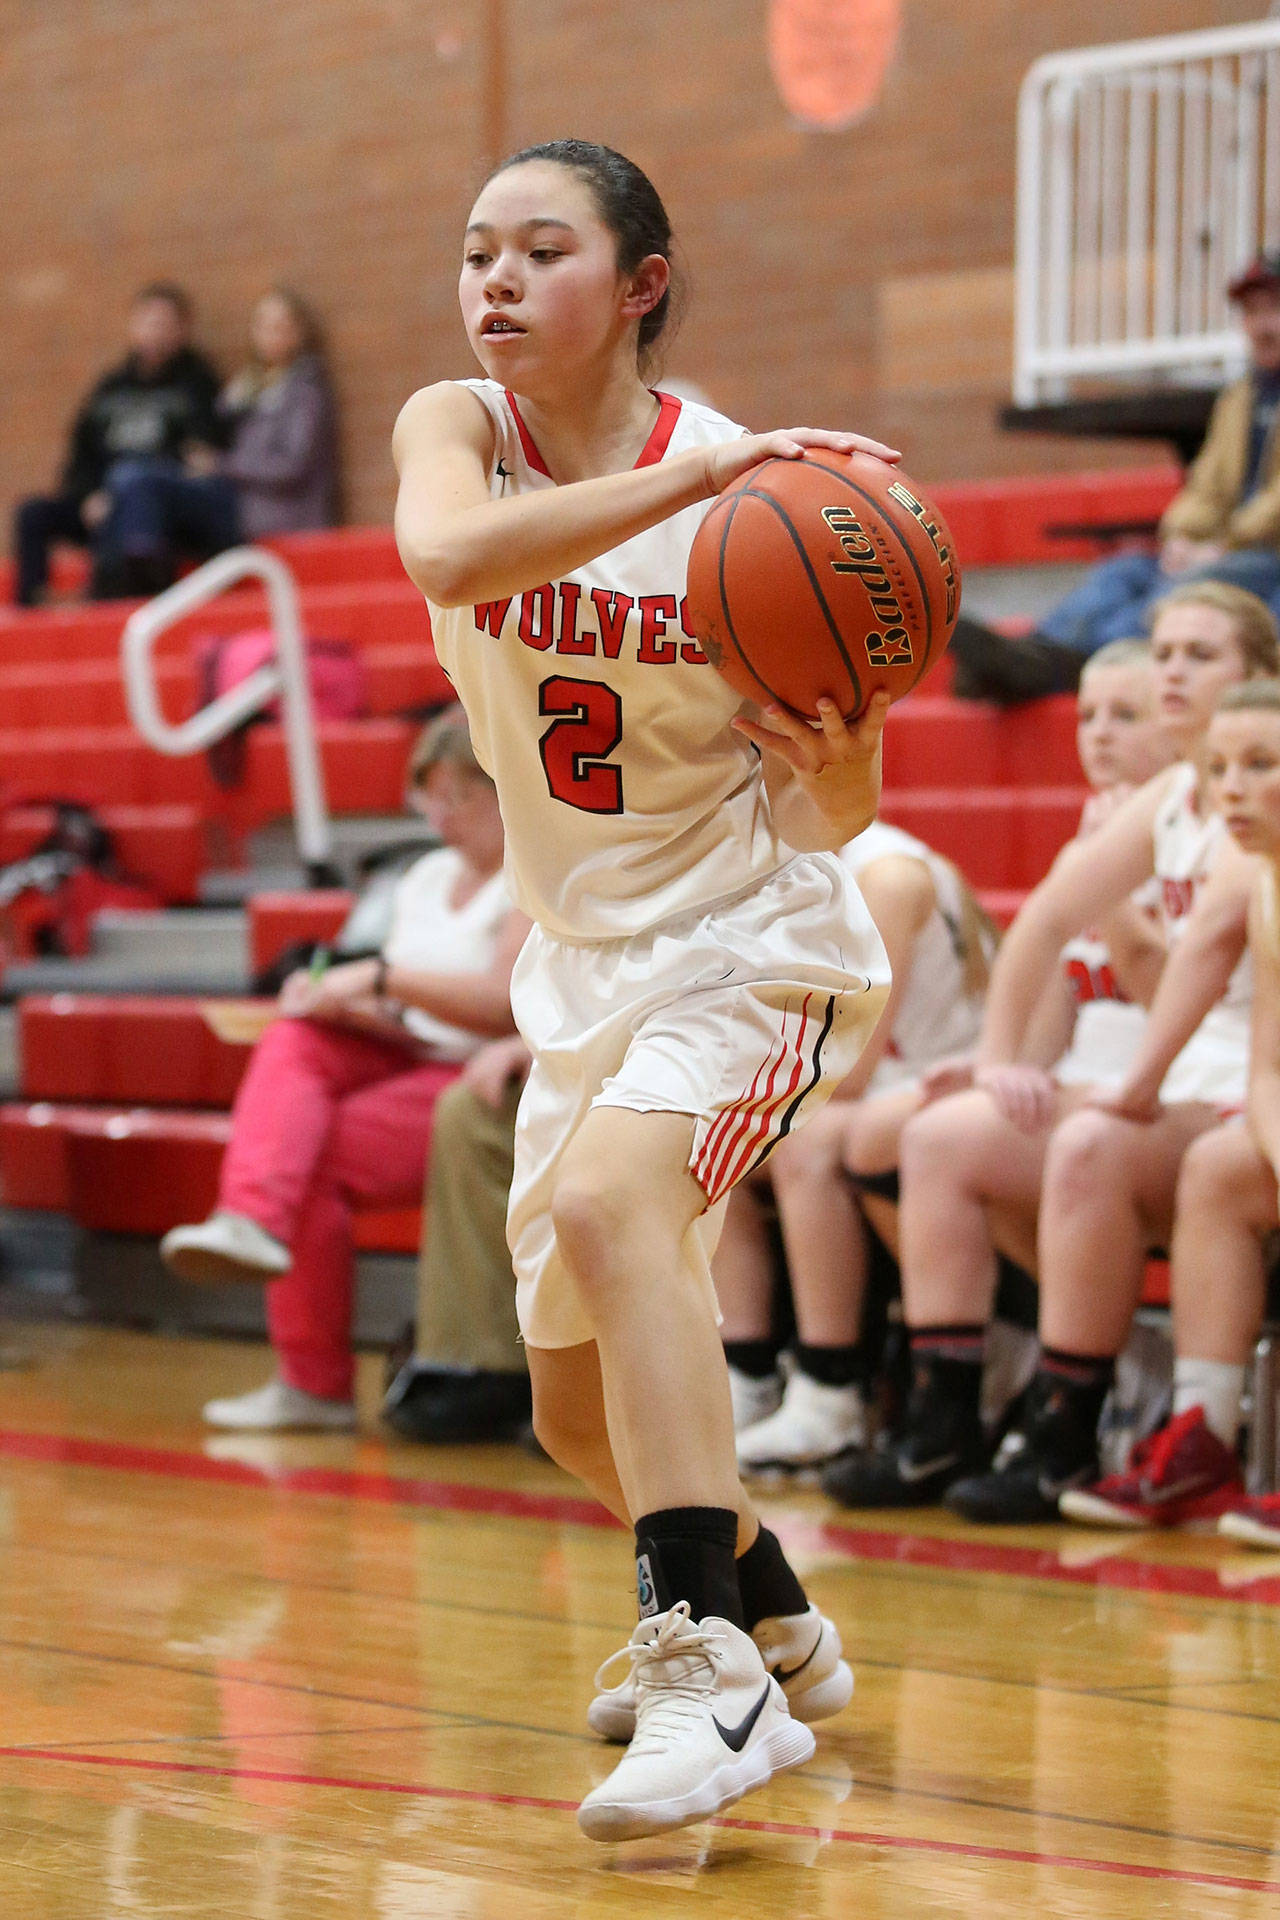 Scout Smith and the Coupeville High School girls basketball team open against Meridian Tuesday. (Photo by John Fisken)